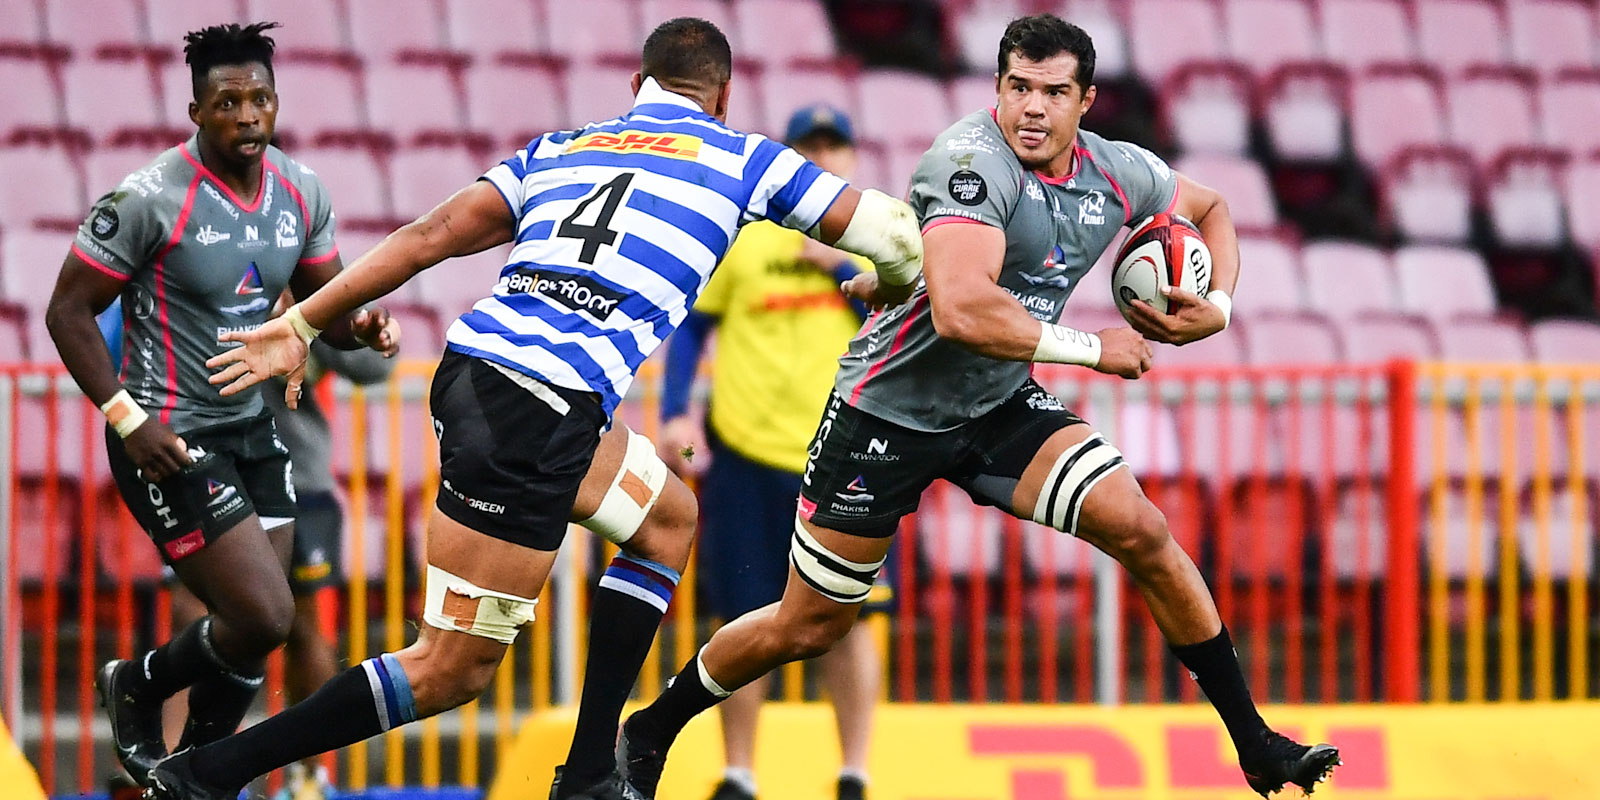 Willie Engelbrecht charging ahead for the Phakisa Pumas.